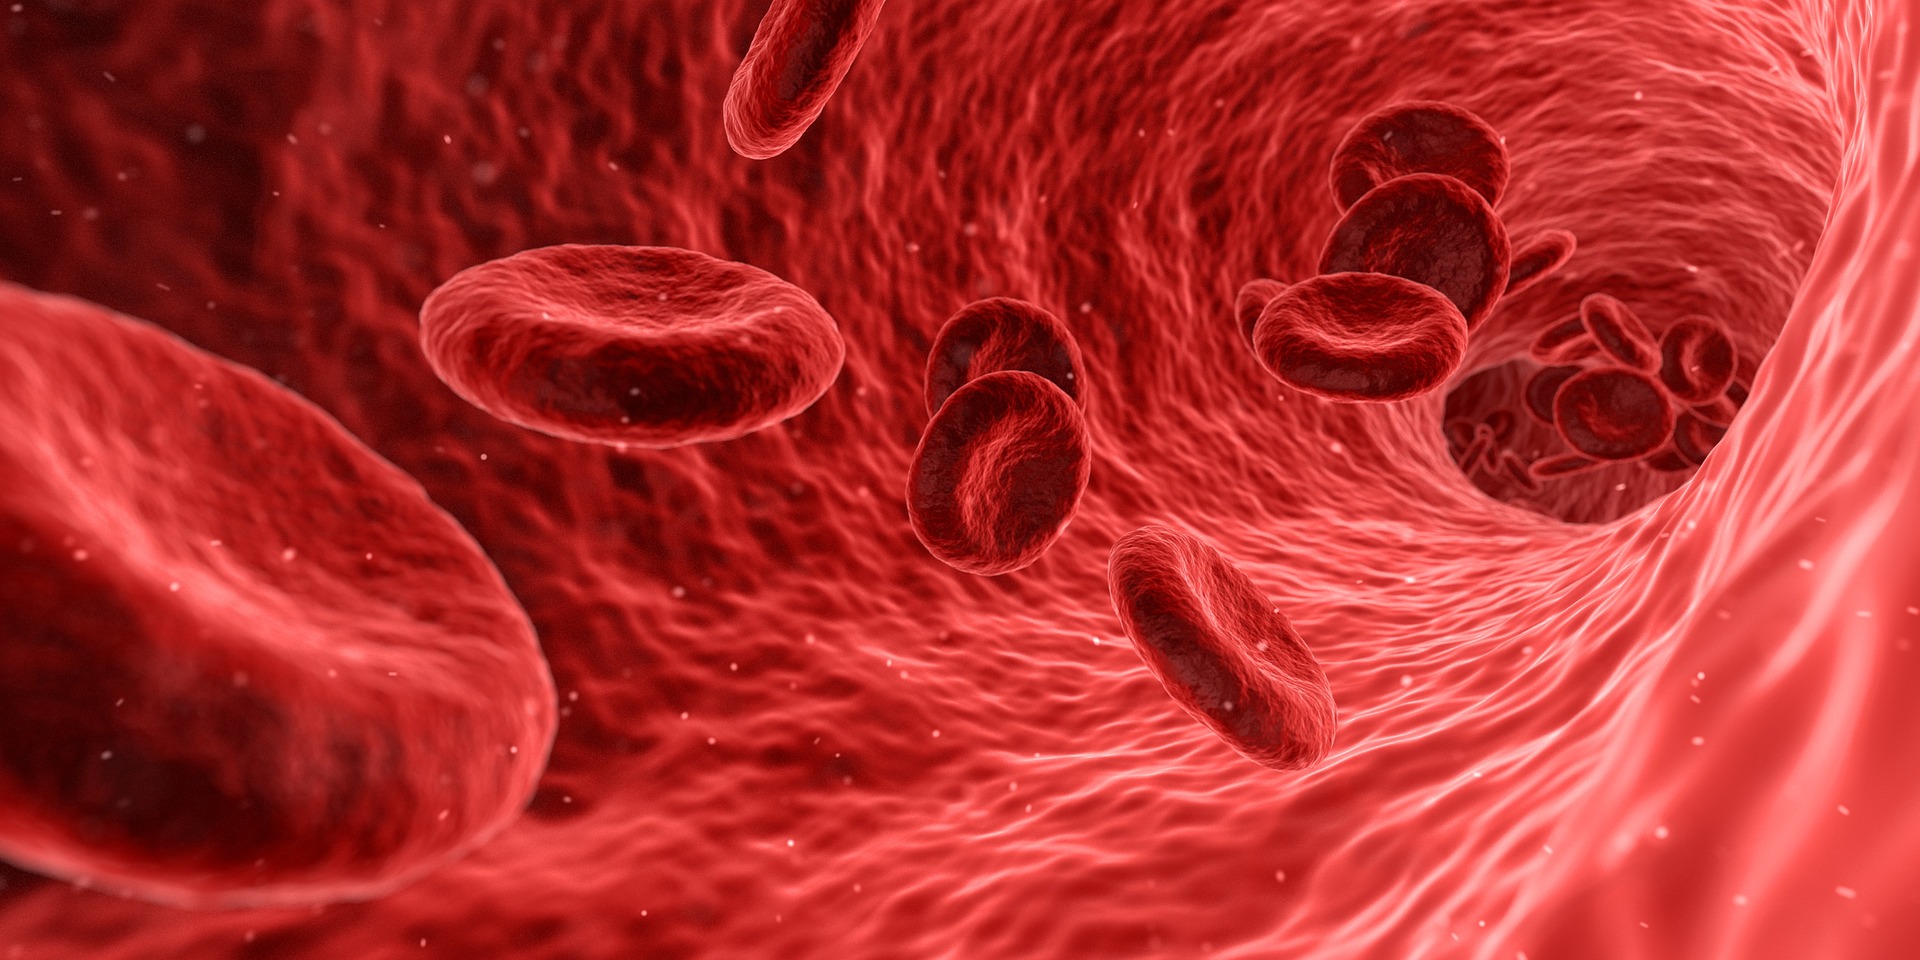 red blood cells, donut shaped, with paler red background